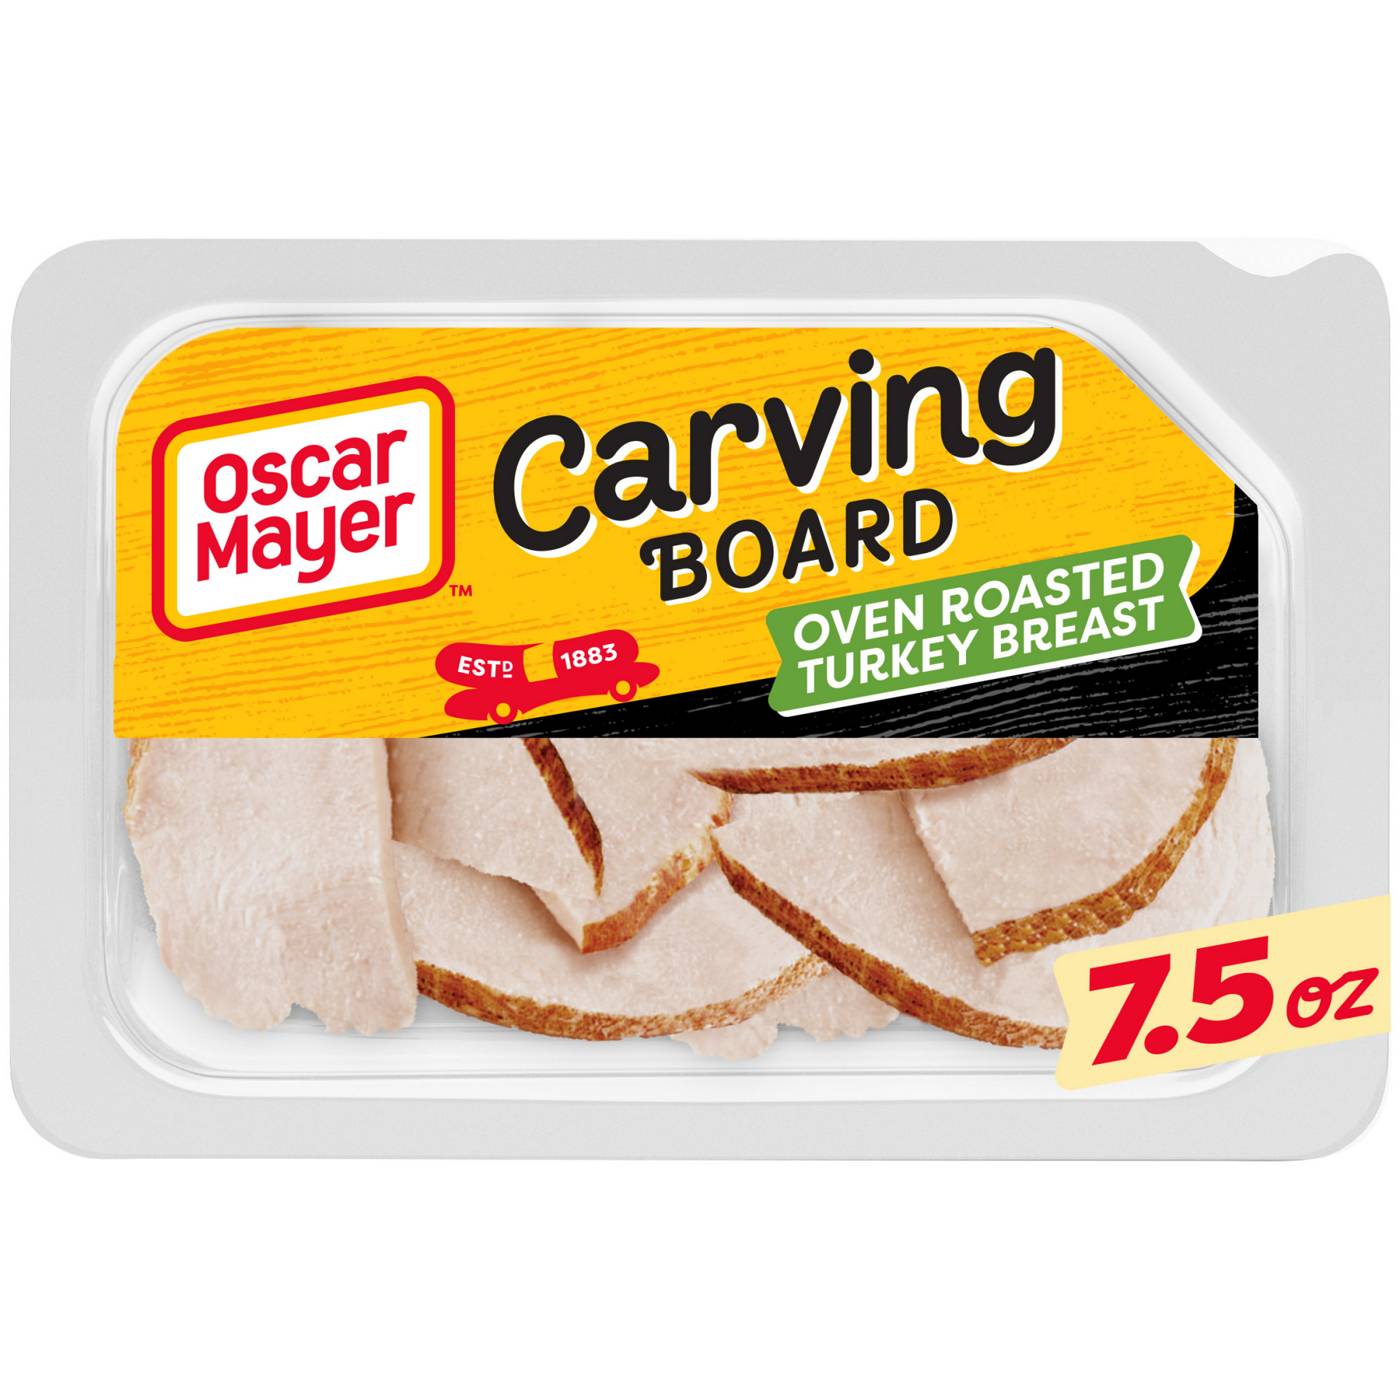 Oscar Mayer Carving Board Oven Roasted Sliced Turkey Breast Lunch Meat; image 1 of 2